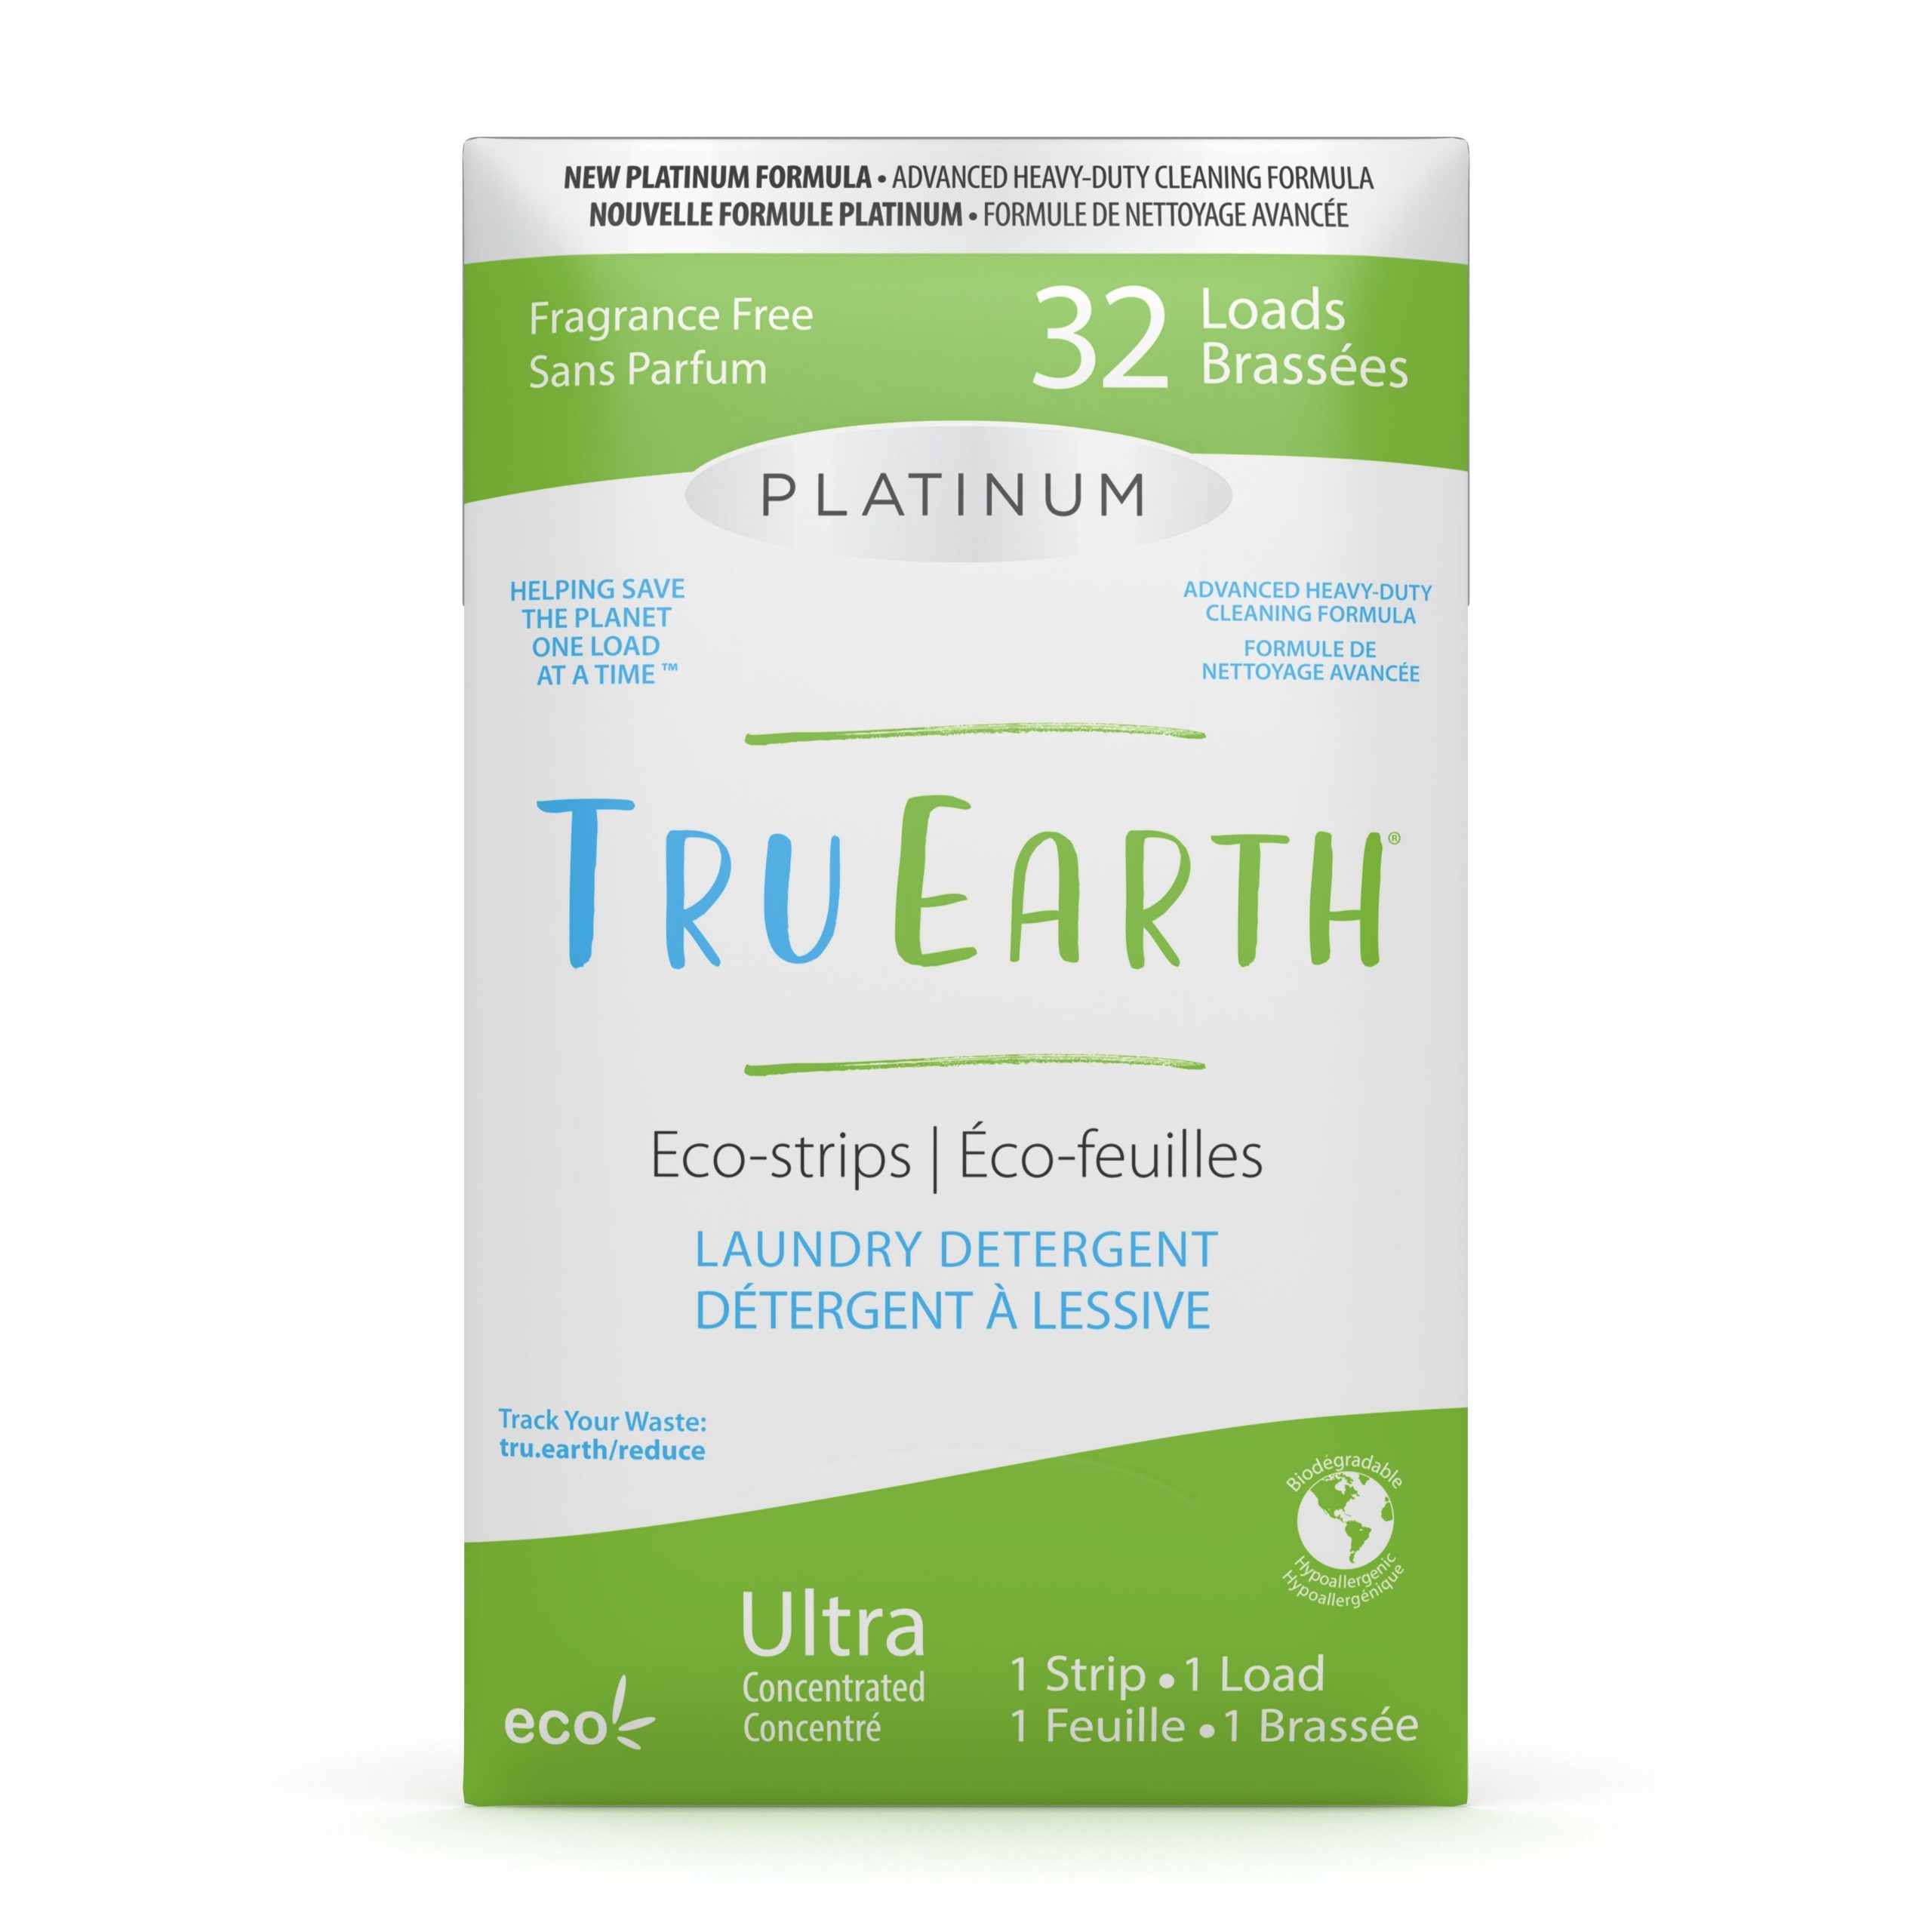 Tru Earth Eco-strips Laundry Detergent - Fragrance Free